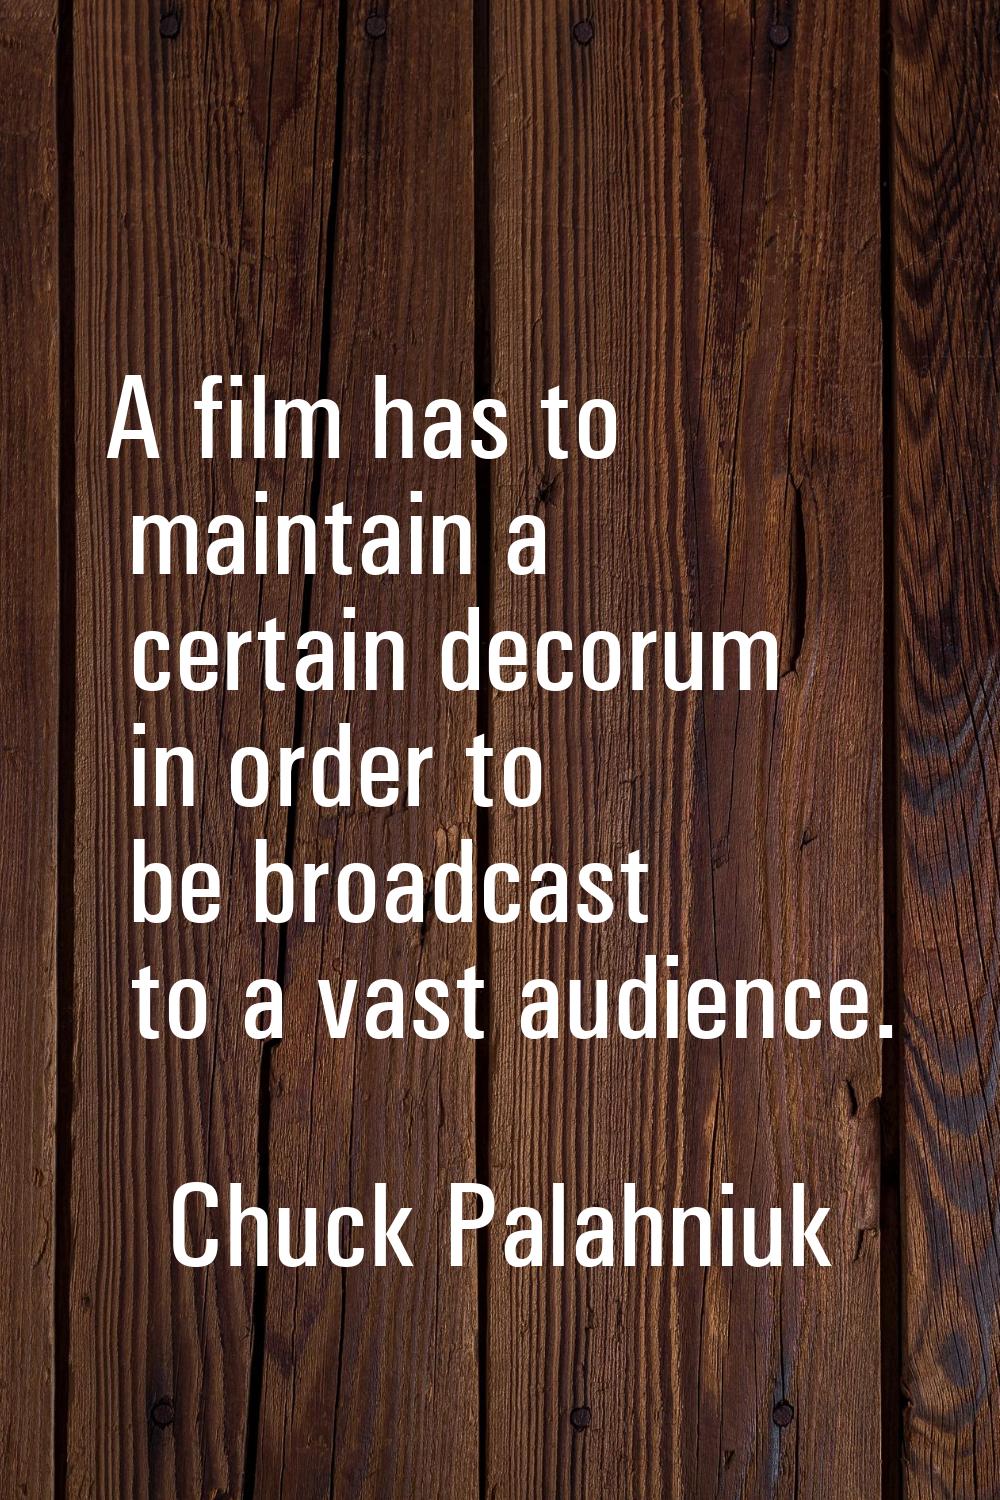 A film has to maintain a certain decorum in order to be broadcast to a vast audience.